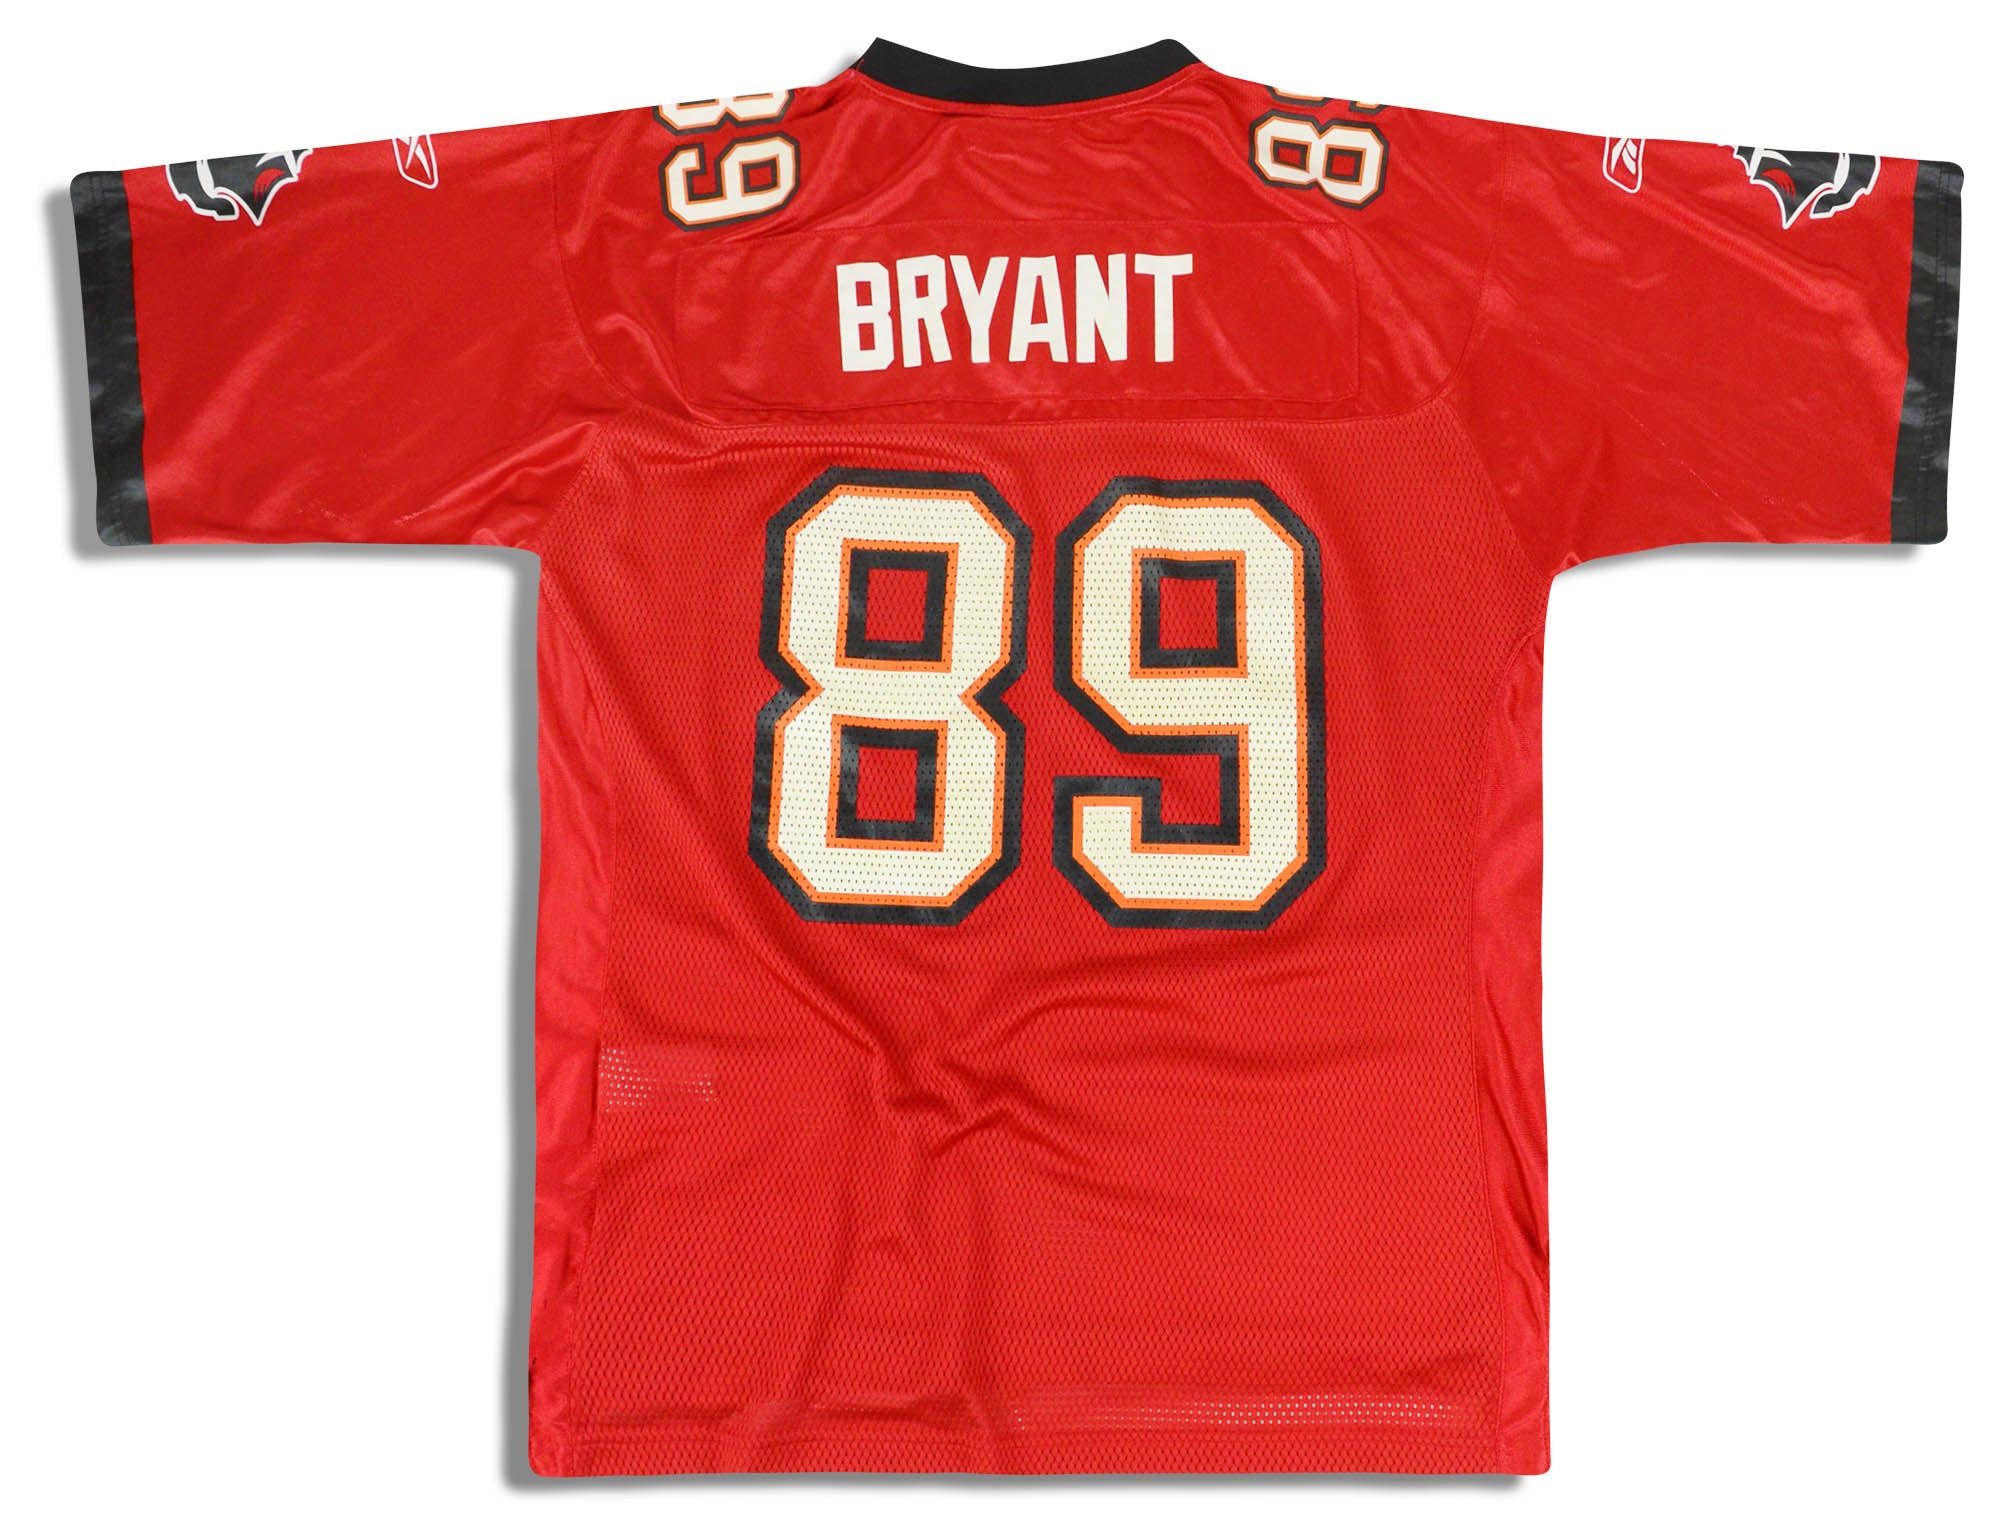 2008-09 TAMPA BAY BUCCANEERS BRYANT #89 REEBOK ON FIELD JERSEY (HOME) L